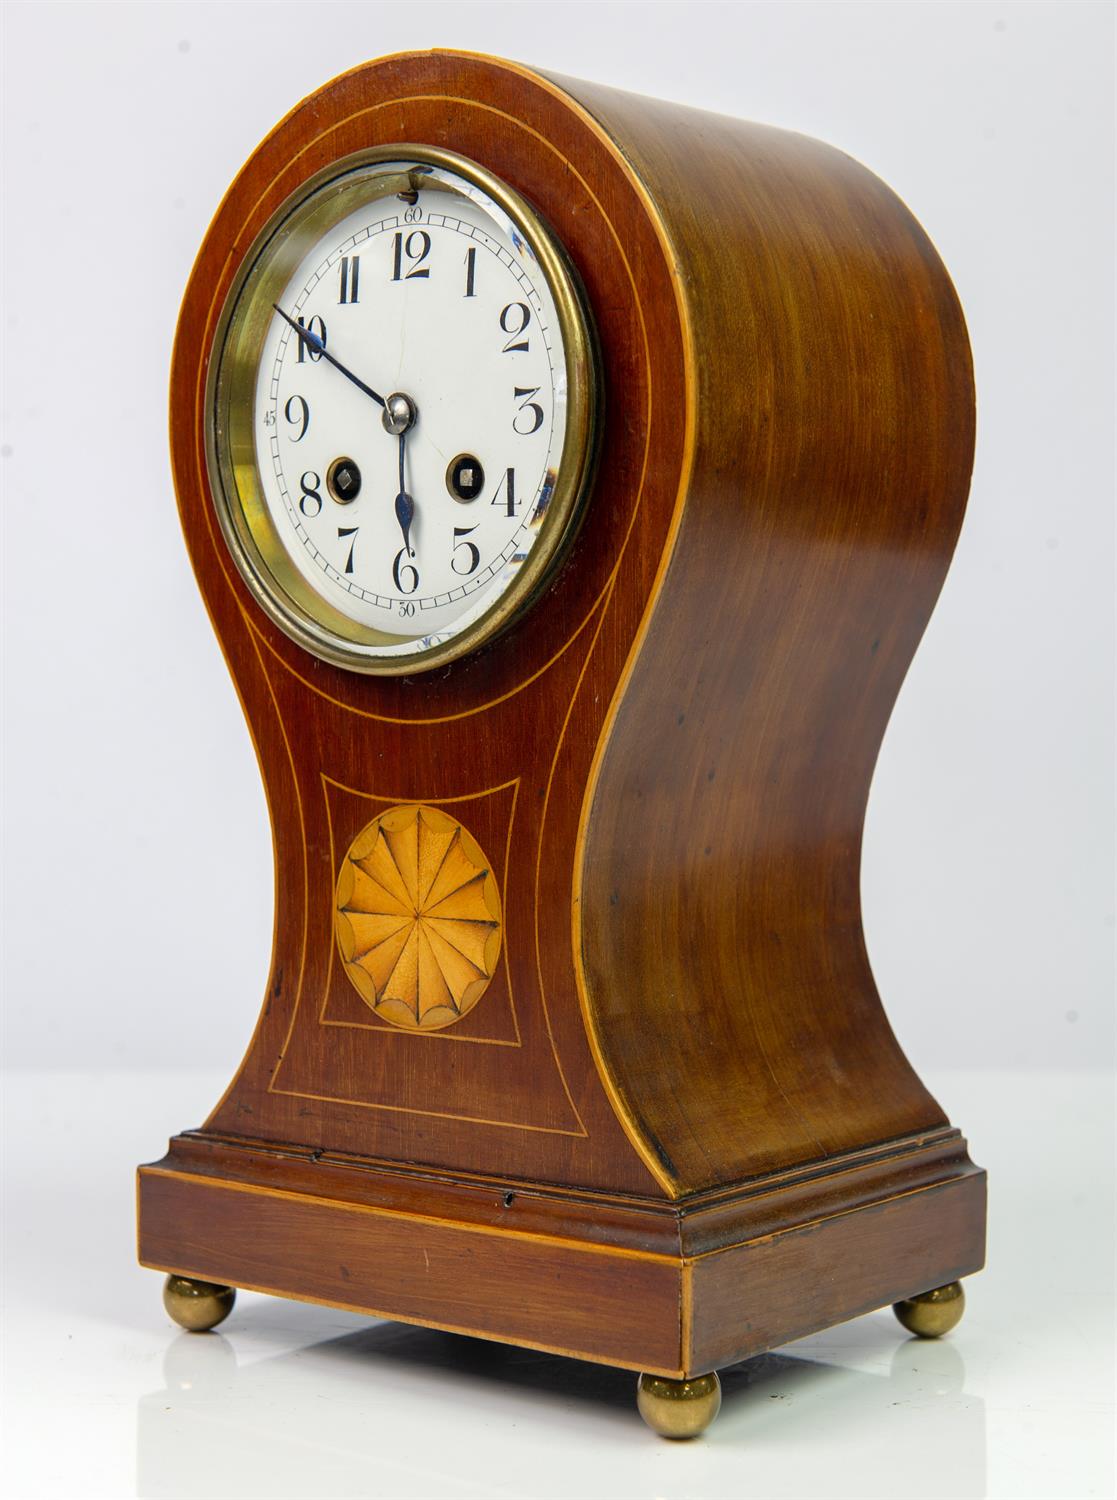 Edwardian mahogany balloon clock the two train French movement by Couillet Freres, - Image 11 of 28